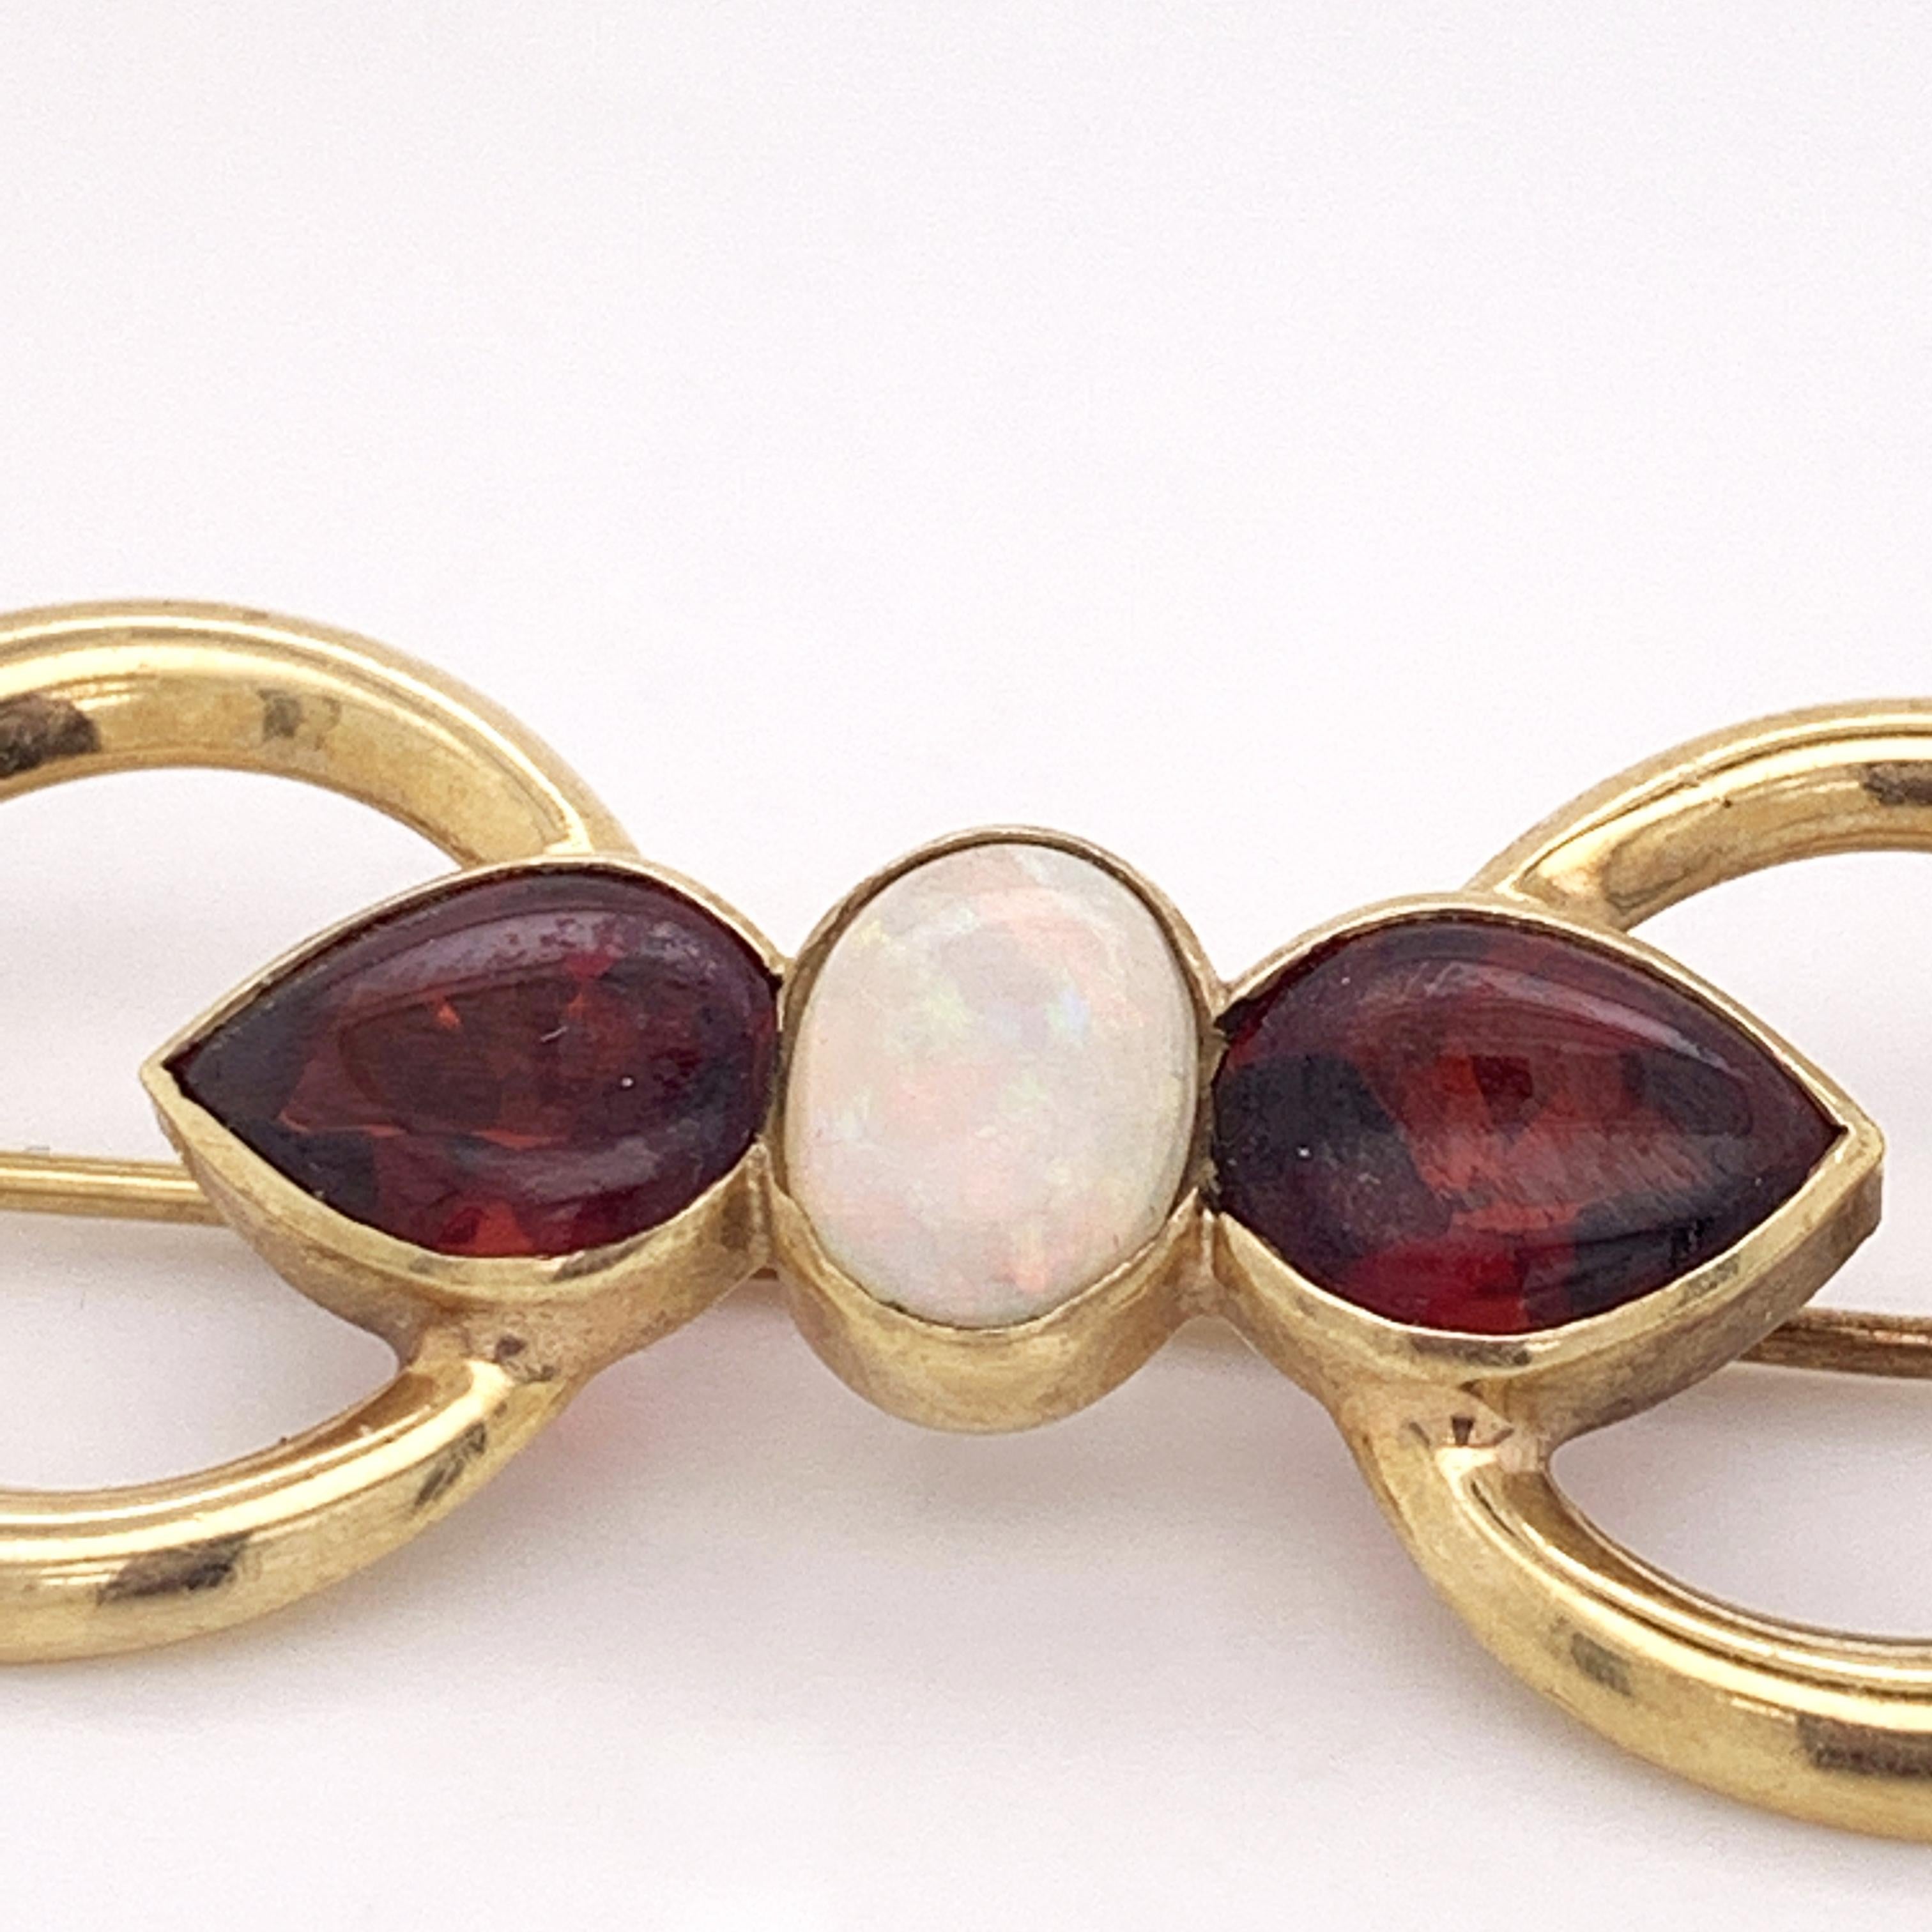 Here we have an stunning 18K yellow gold brooch featuring a beautiful oval shaped NaturalOpal flanked by two lovely deep red pear shaped Almandite Garnets. The lustrous loops of yellow gold are perfectly juxtaposed against the gems which allows both